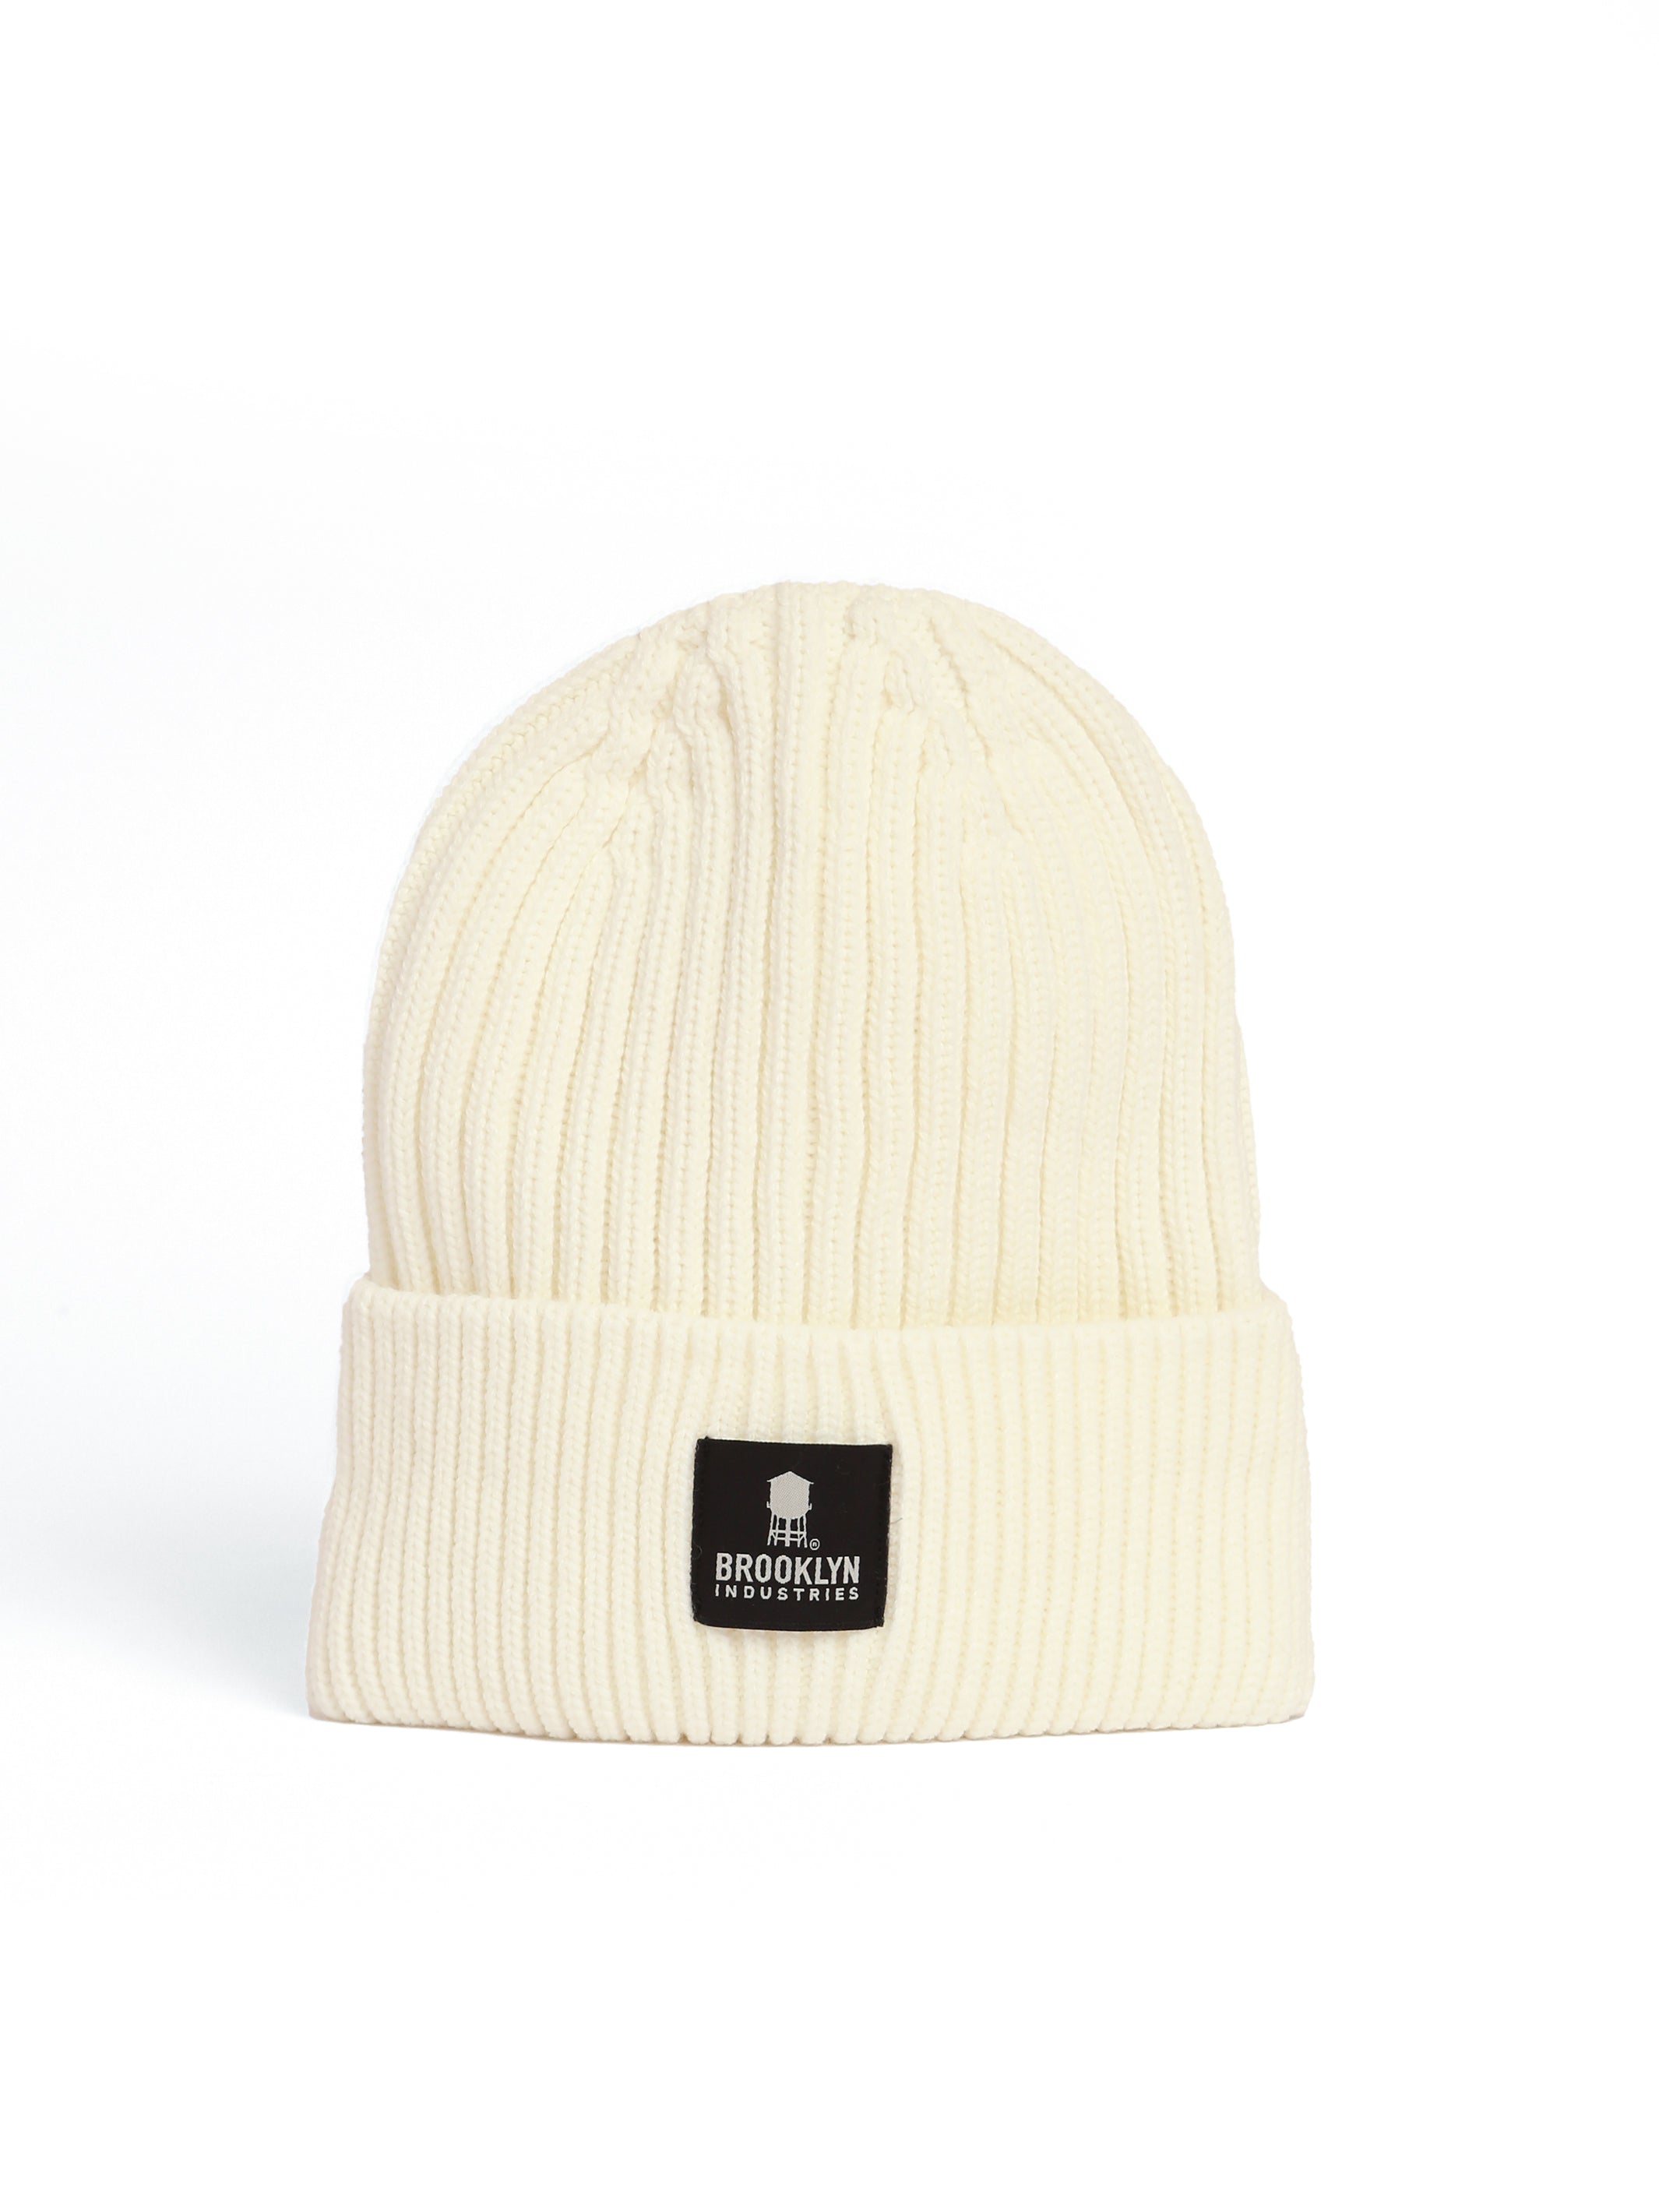 Ribbed Beanie Hat in Off White - BROOKLYN INDUSTRIES